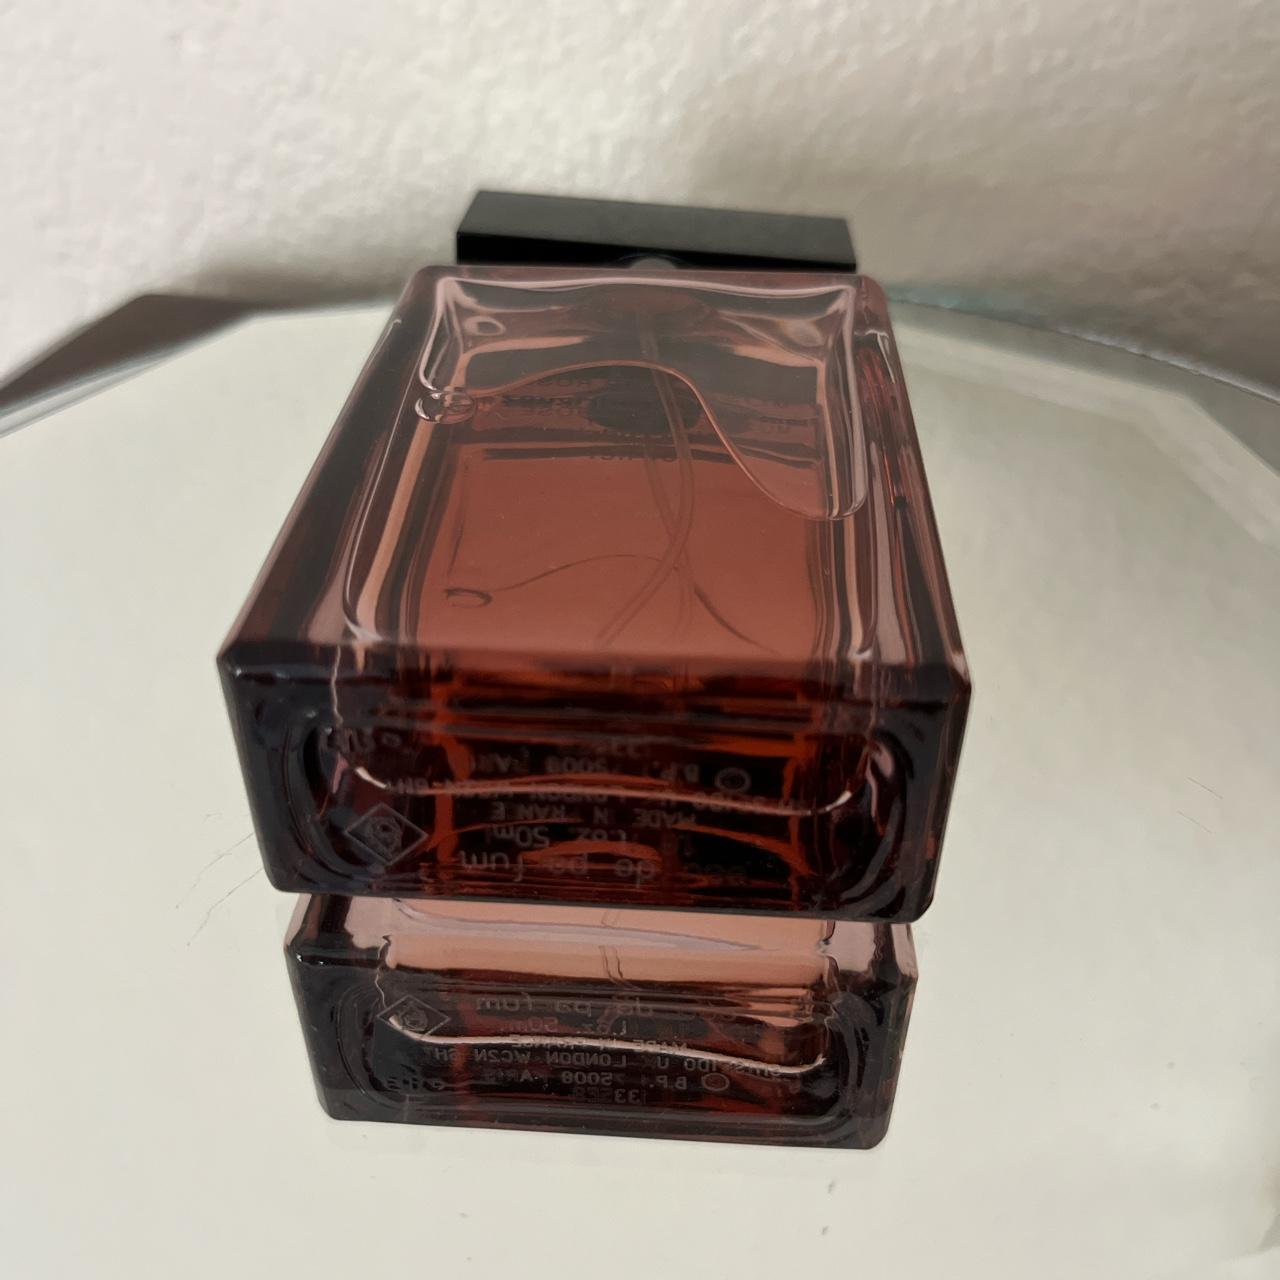 Narciso Rodriguez Pink and Black Fragrance (3)